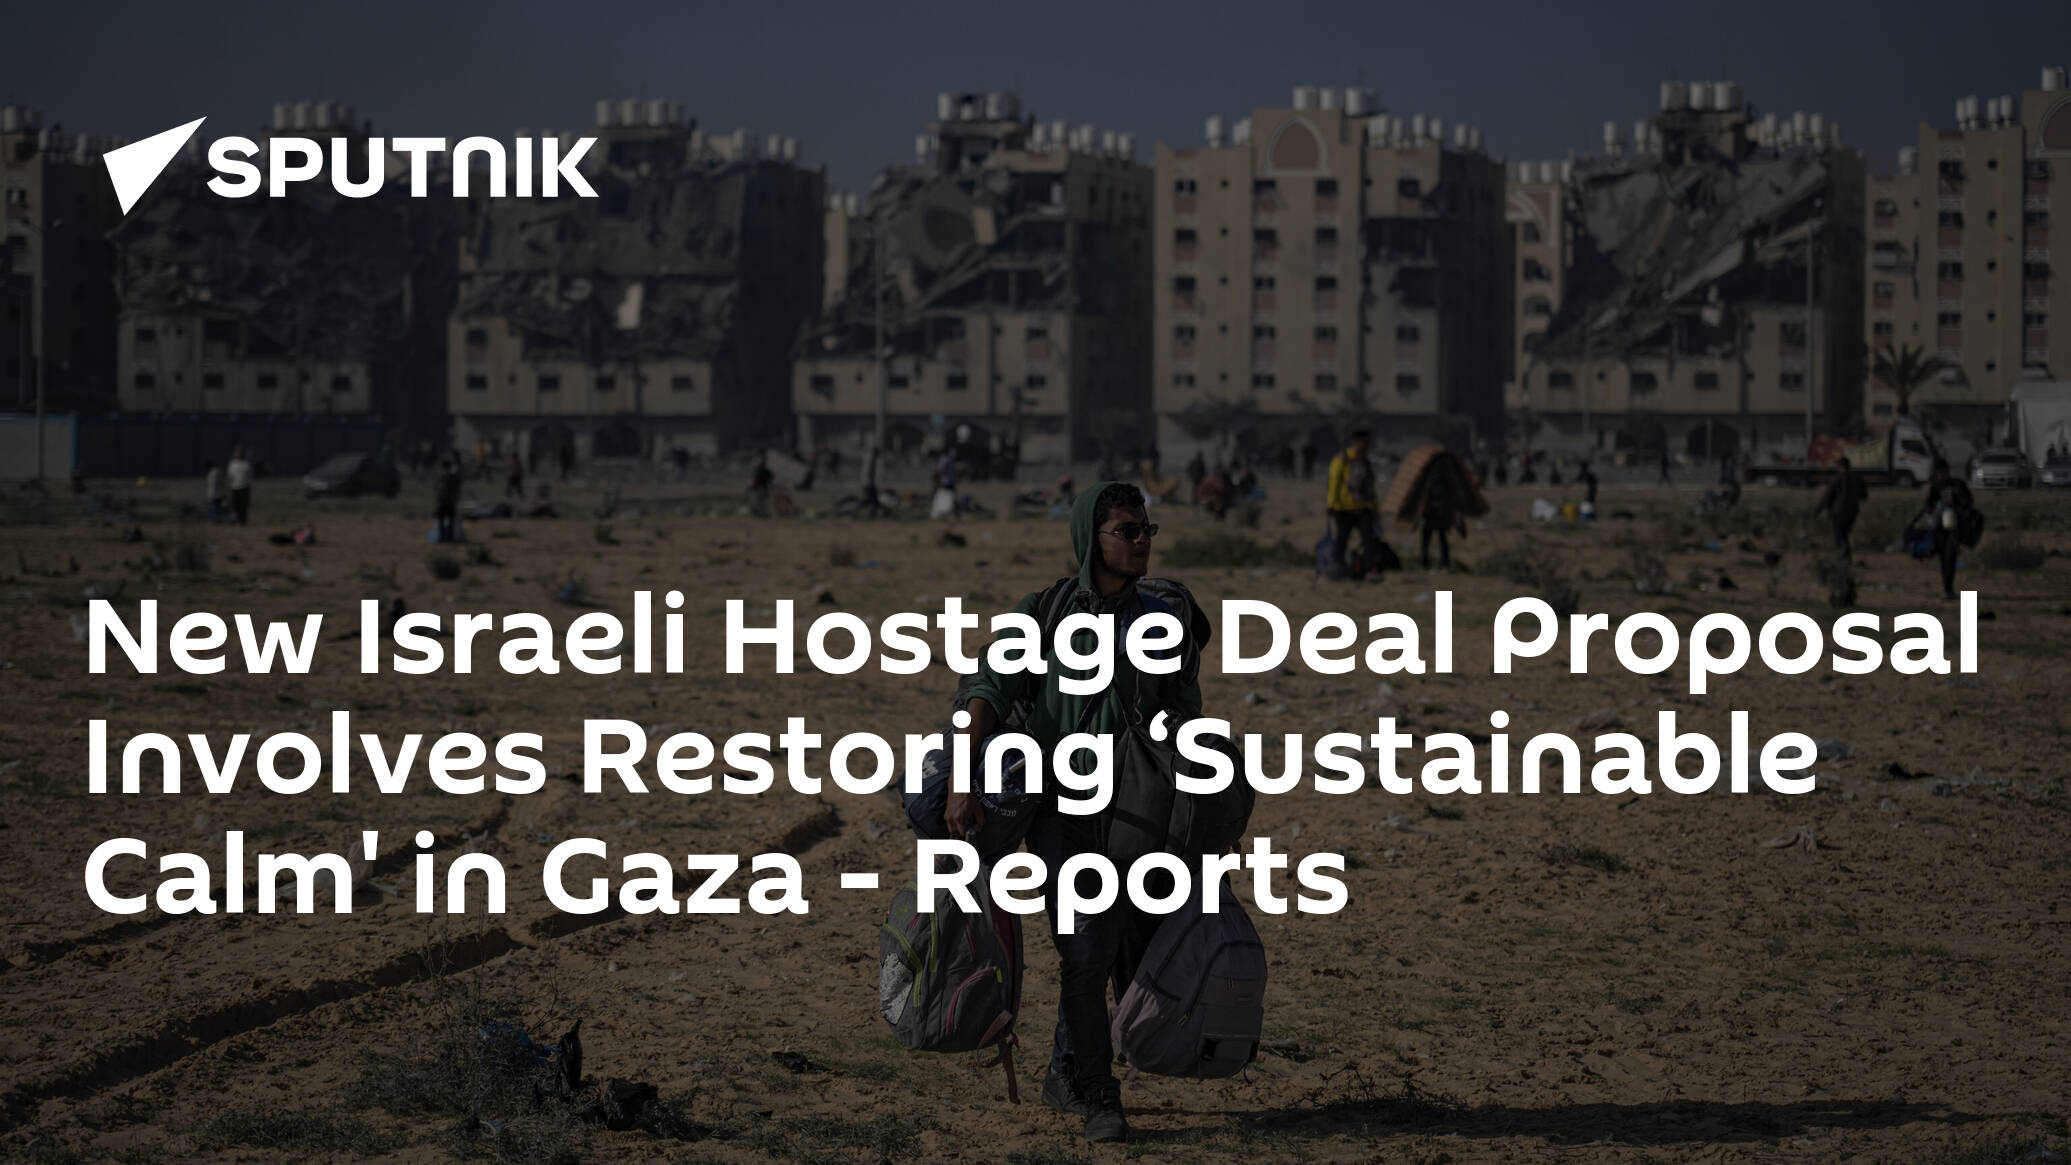 New Israeli Hostage Deal Proposal Involves Restoring ‘Sustainable Calm' in Gaza – Reports